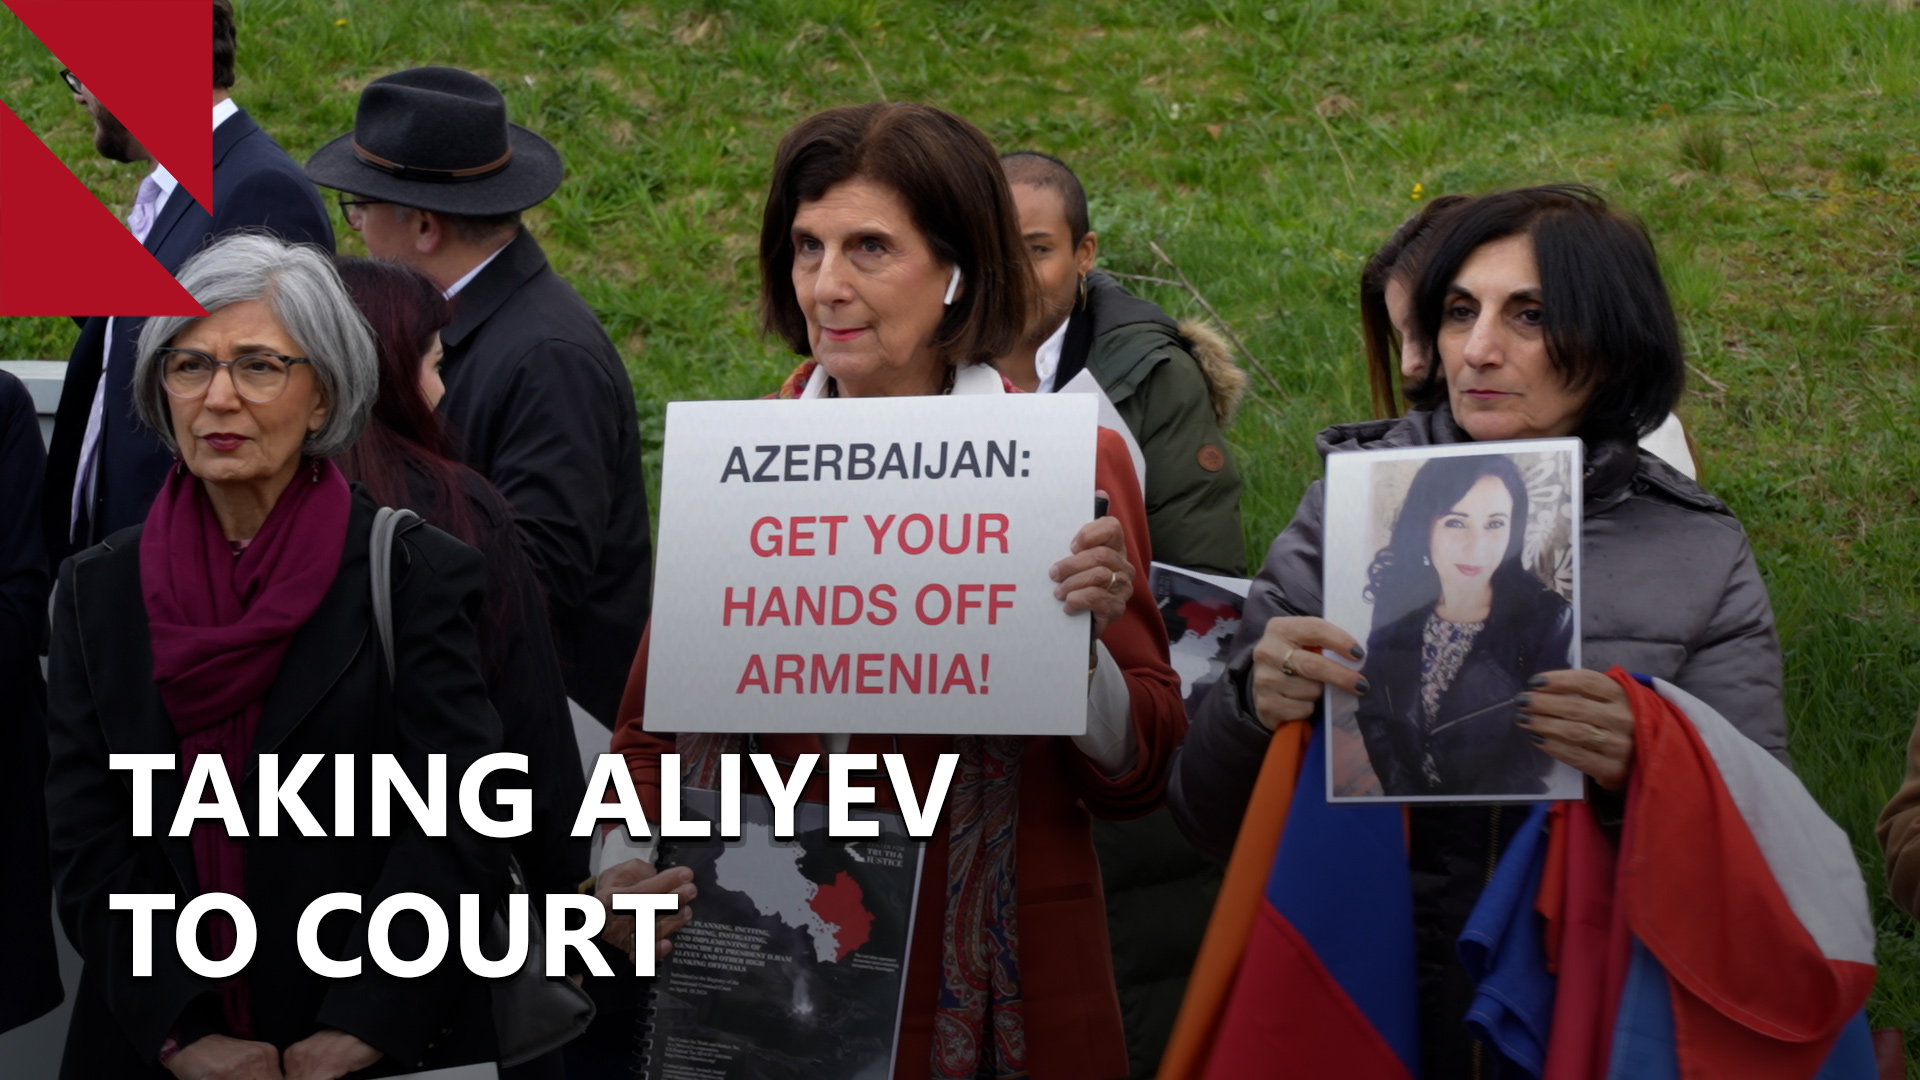 Inside CFTJ’s demand for Azerbaijan to be investigated for genocide